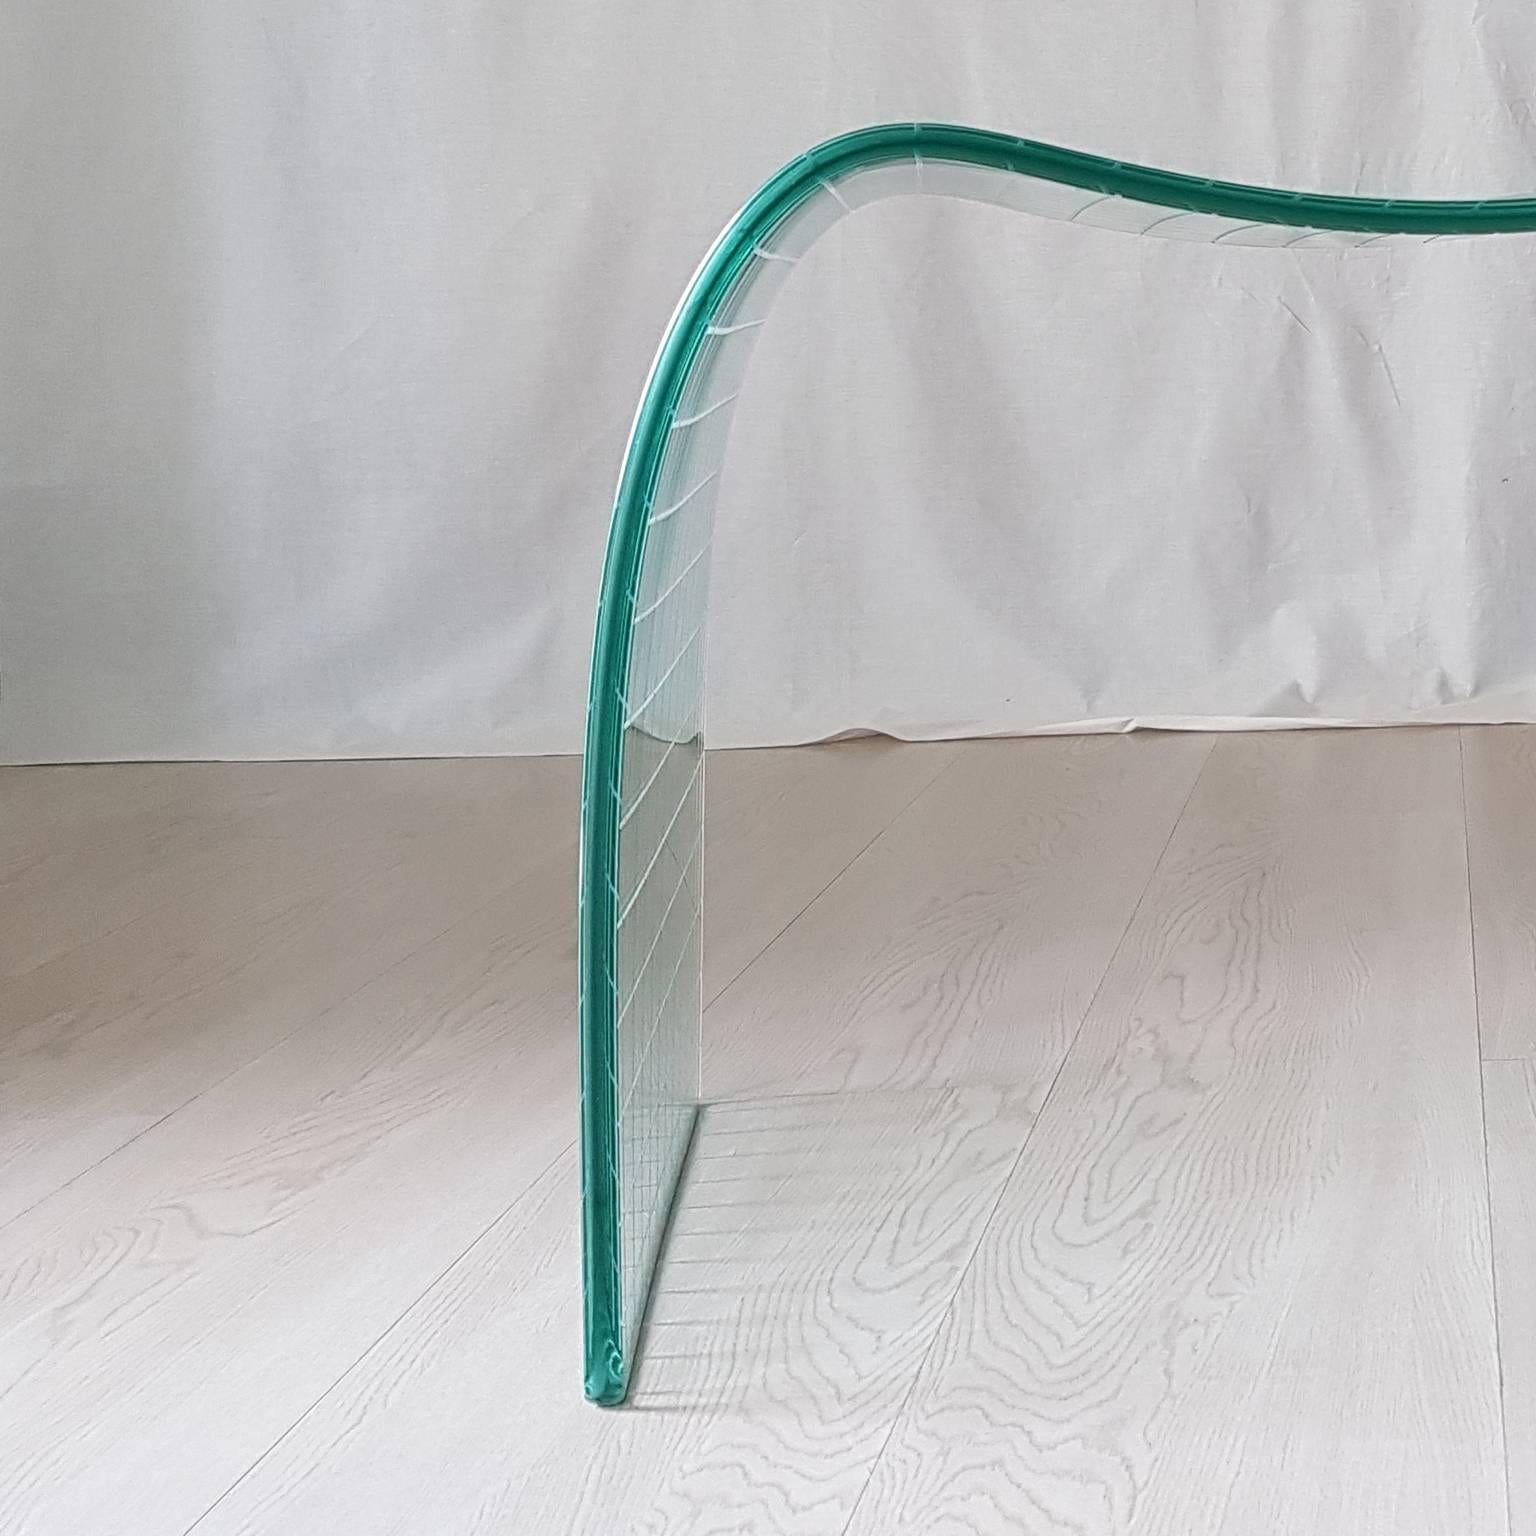 20th Century Limited Edition Italian Fiam Curved Crystal Glass Stool with Incisions, 1975 For Sale